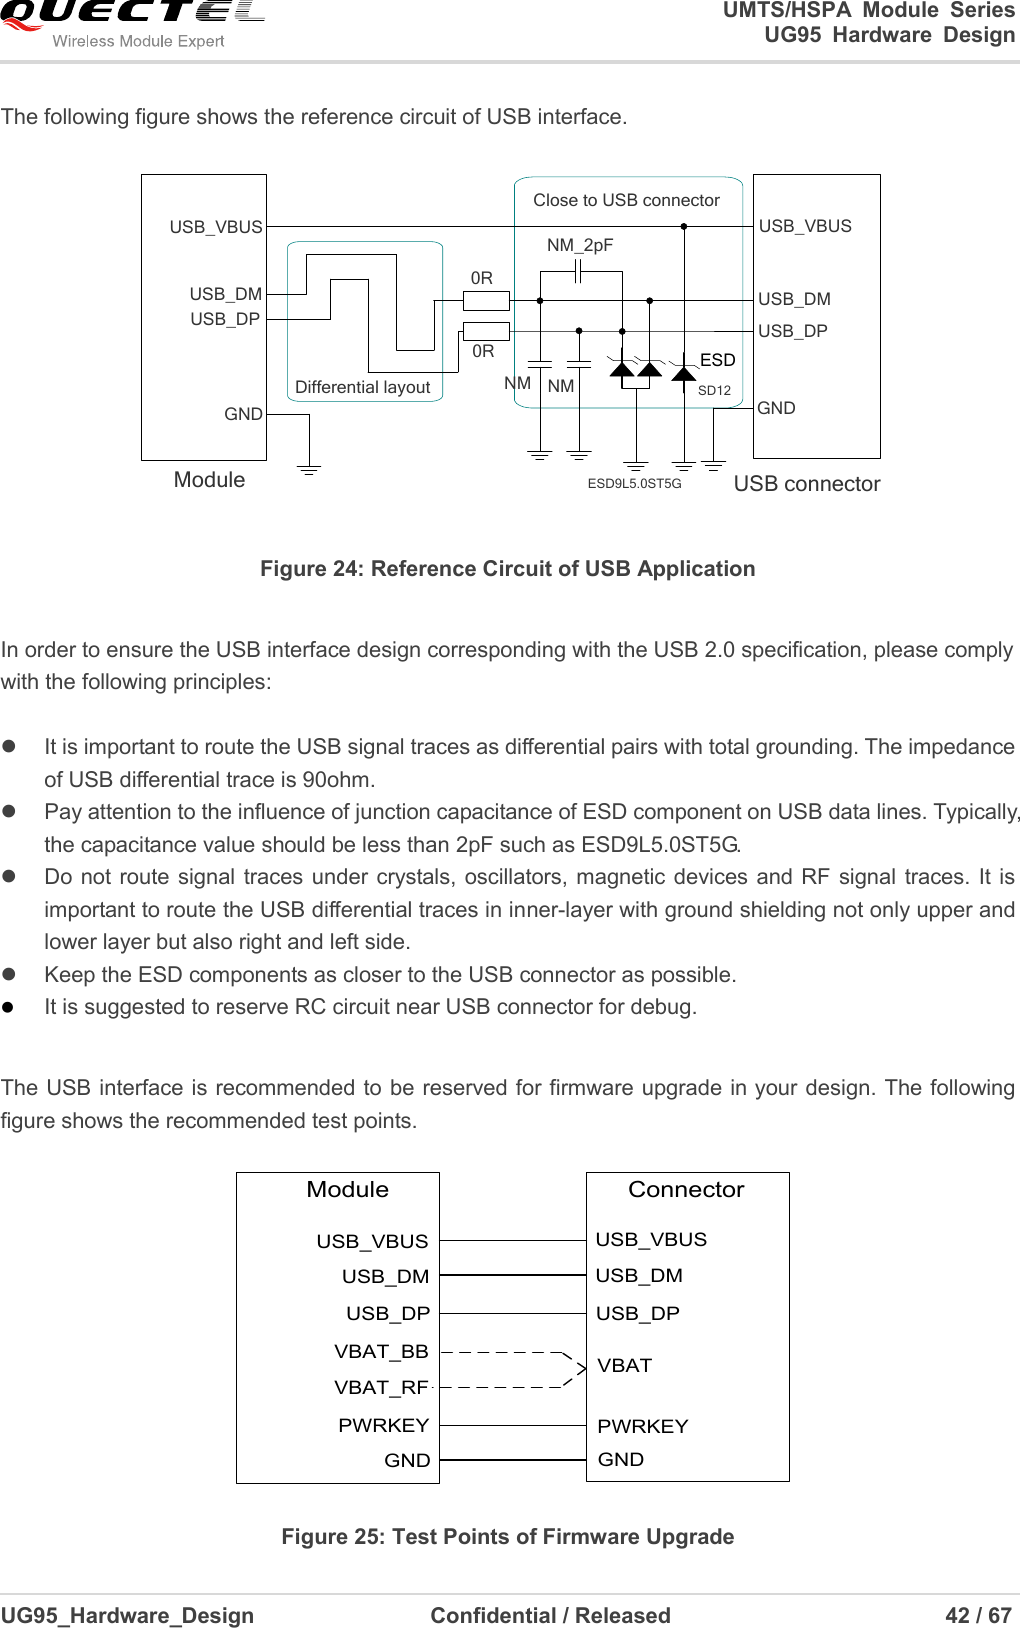                                                                                                                                               UMTS/HSPA  Module  Series                                                                 UG95  Hardware  Design  UG95_Hardware_Design                  Confidential / Released                             42 / 67    The following figure shows the reference circuit of USB interface.  ModuleUSB_VBUSUSB_DPUSB_DMGNDUSB connectorClose to USB connectorDifferential layoutUSB_VBUSUSB_DPUSB_DMGNDNM_2pFESDESD9L5.0ST5GSD120R0RNM NM Figure 24: Reference Circuit of USB Application  In order to ensure the USB interface design corresponding with the USB 2.0 specification, please comply with the following principles:    It is important to route the USB signal traces as differential pairs with total grounding. The impedance of USB differential trace is 90ohm.   Pay attention to the influence of junction capacitance of ESD component on USB data lines. Typically, the capacitance value should be less than 2pF such as ESD9L5.0ST5G.   Do not route signal traces under crystals, oscillators, magnetic devices and RF signal  traces. It is important to route the USB differential traces in inner-layer with ground shielding not only upper and lower layer but also right and left side.   Keep the ESD components as closer to the USB connector as possible.  It is suggested to reserve RC circuit near USB connector for debug.  The USB interface is recommended to be reserved for firmware upgrade in your design. The following figure shows the recommended test points.   ModuleUSB_DMUSB_DPVBAT_BBUSB_VBUSPWRKEYGNDVBAT_RFUSB_DMUSB_DPVBATUSB_VBUSPWRKEYGNDConnector Figure 25: Test Points of Firmware Upgrade 